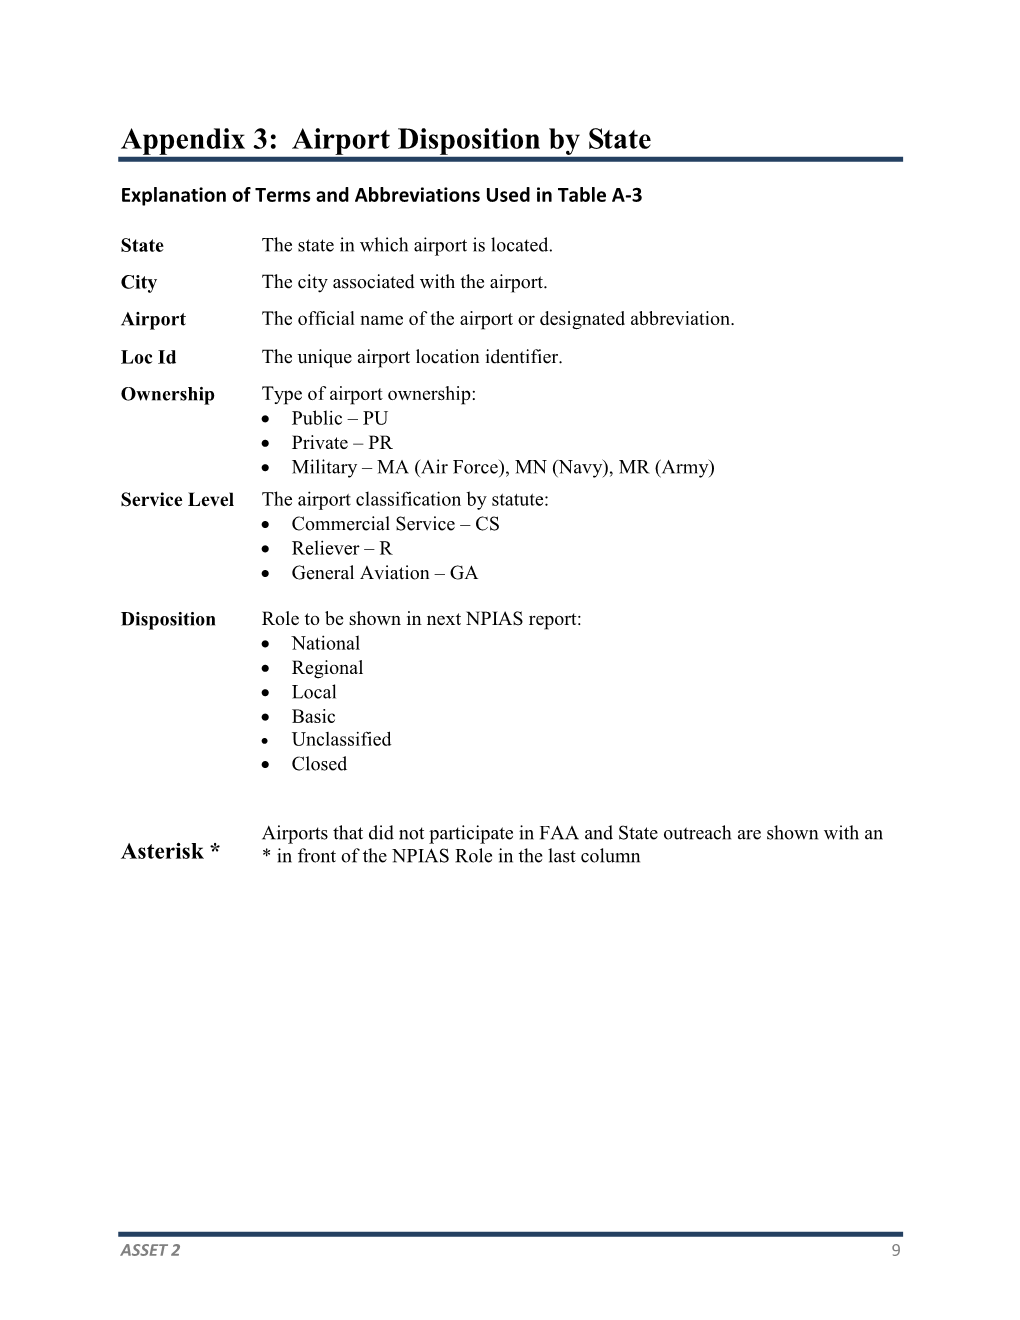 ASSET 2: In-Depth Review of the 497 Unclassified Airports , March 2014